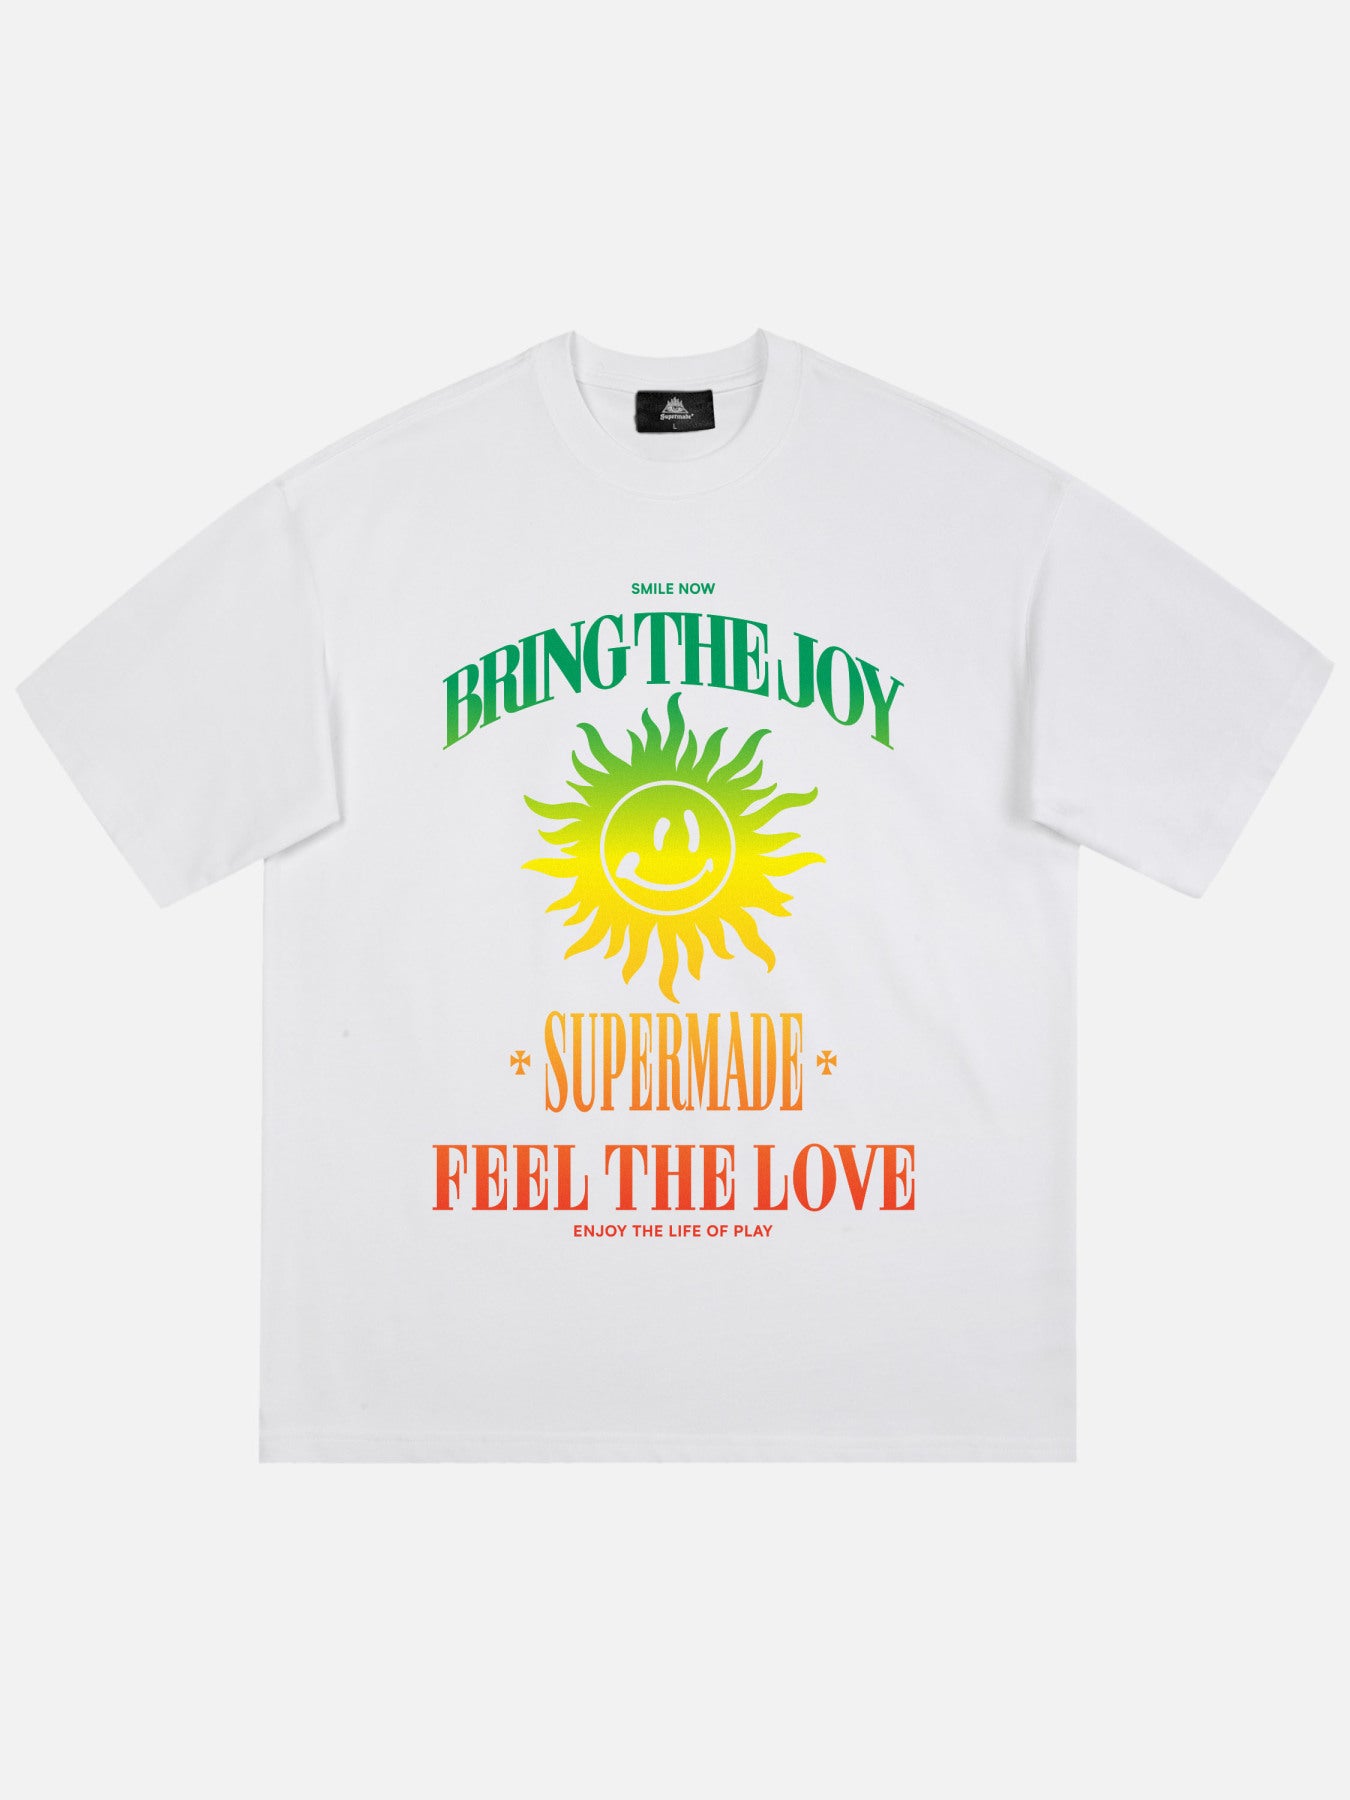 The Supermade Smiley Print T-shirt